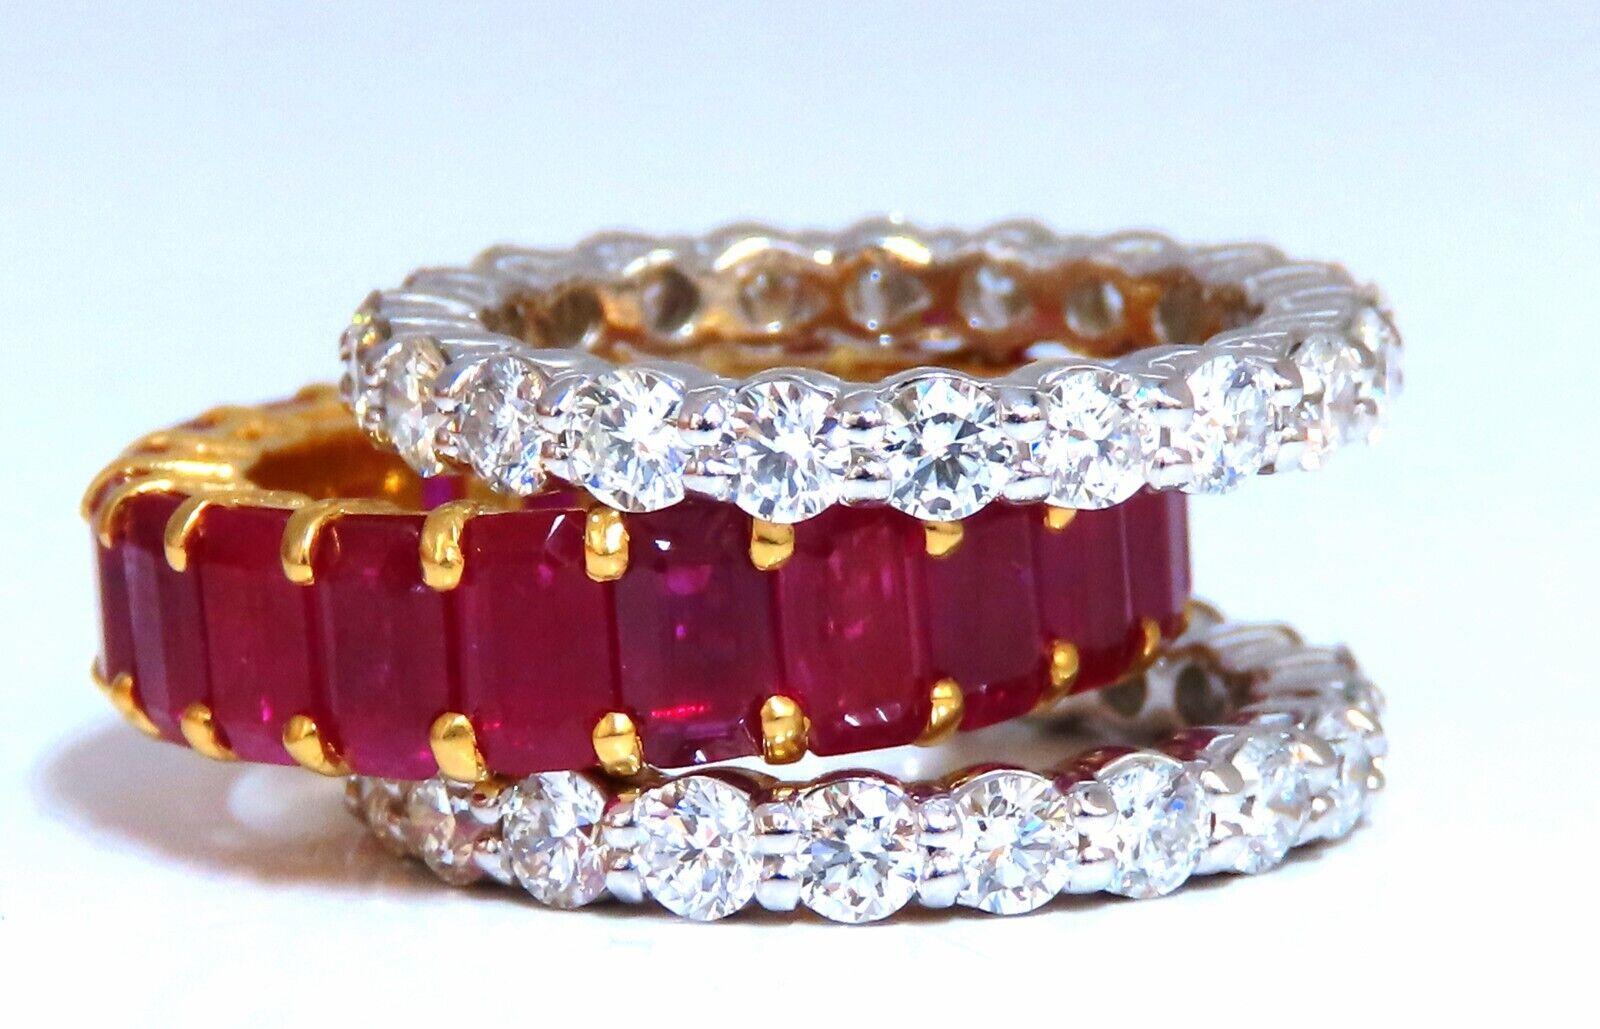 8ct. emerald cut Natural Rubies & 

 3.36ct diamonds stackable rings.

Three rings.

Rubies:

Clean Clarity & full emerald cuts.

Transparent & Vivid red colors.

Average: 3 x 5mm each / 21 count

3.36ct. natural round brilliant diamonds

G-color